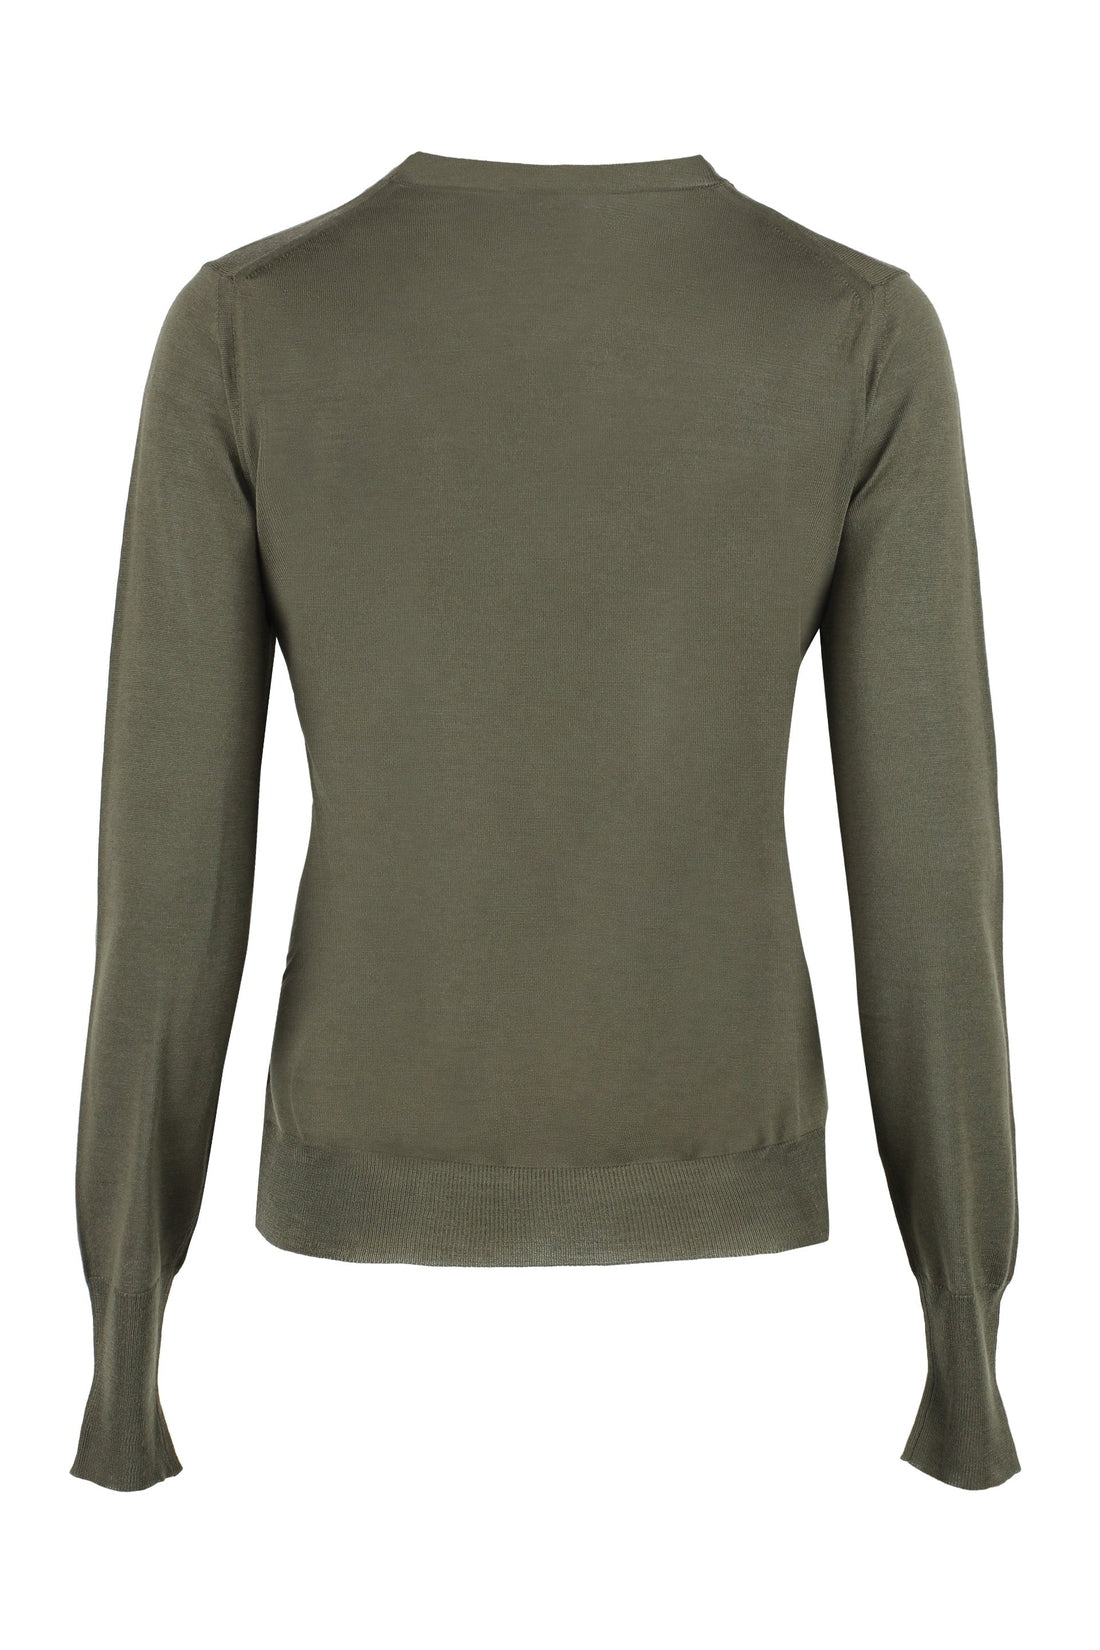 Roberto Collina-OUTLET-SALE-Wool crew-neck sweater-ARCHIVIST